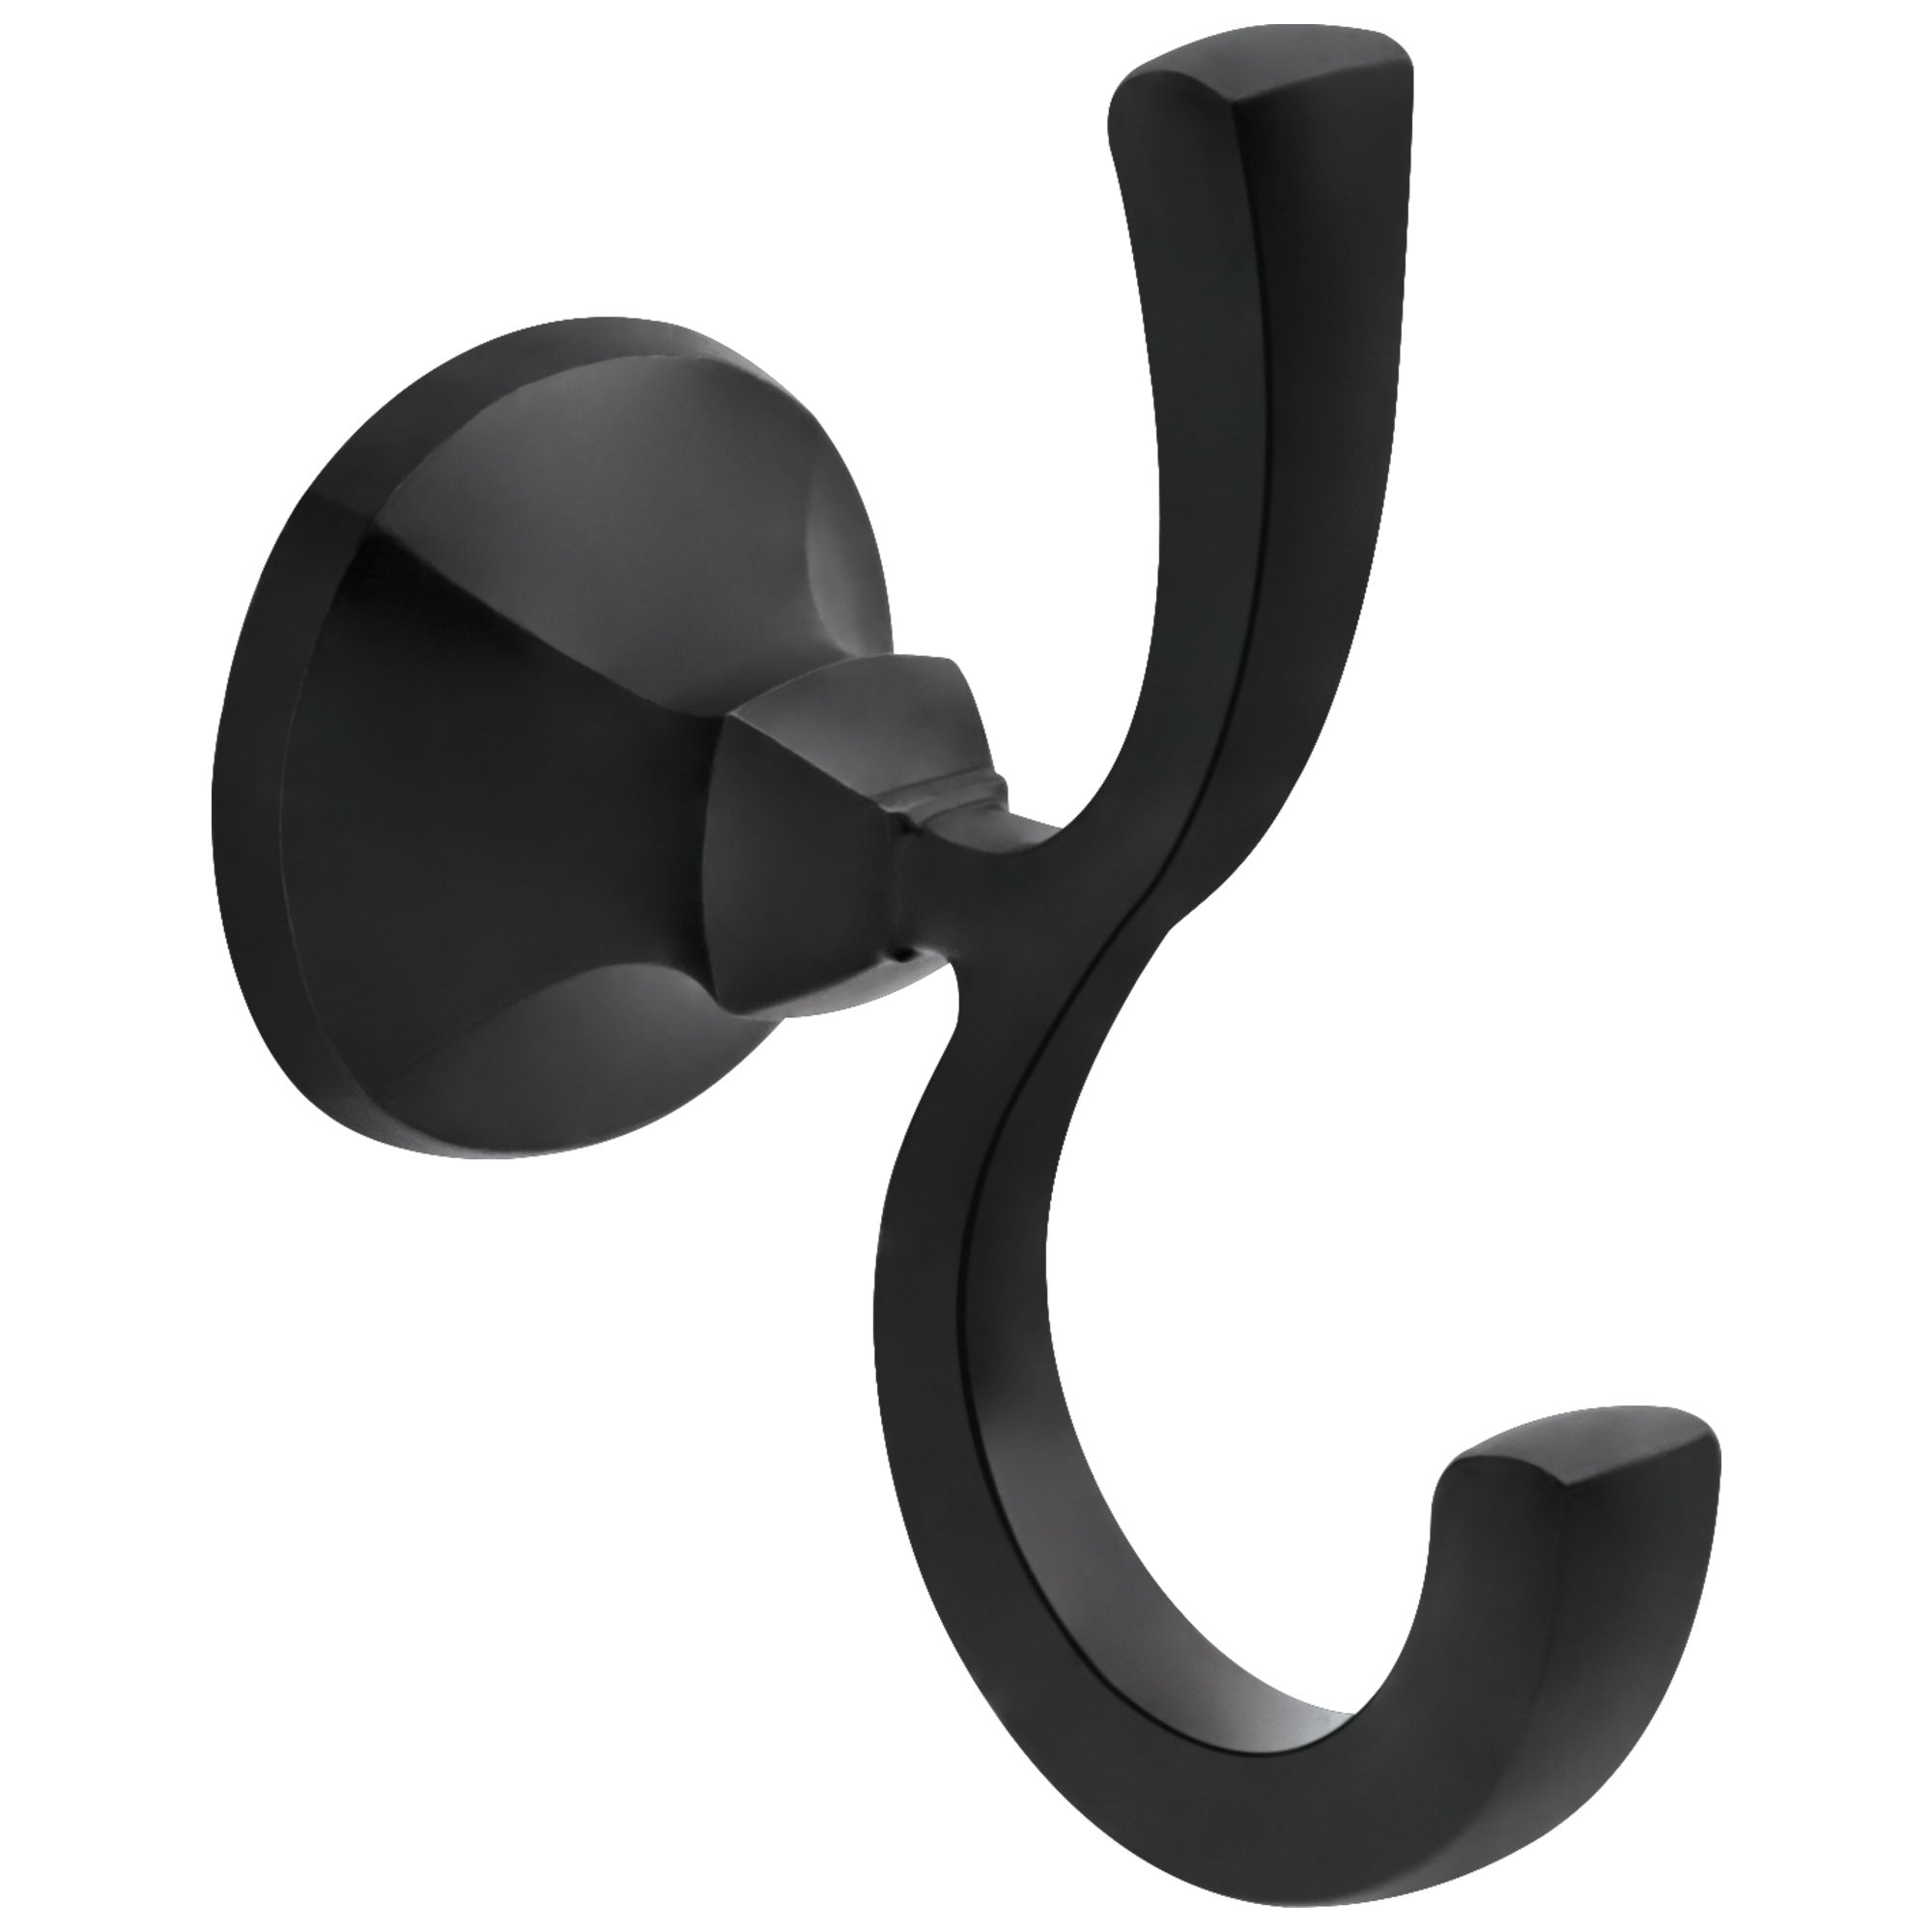 Robe Hooks - Get a Decorative Robe or Towel Hook for you Bathroom Tagged  delta-ashlyn-collection 